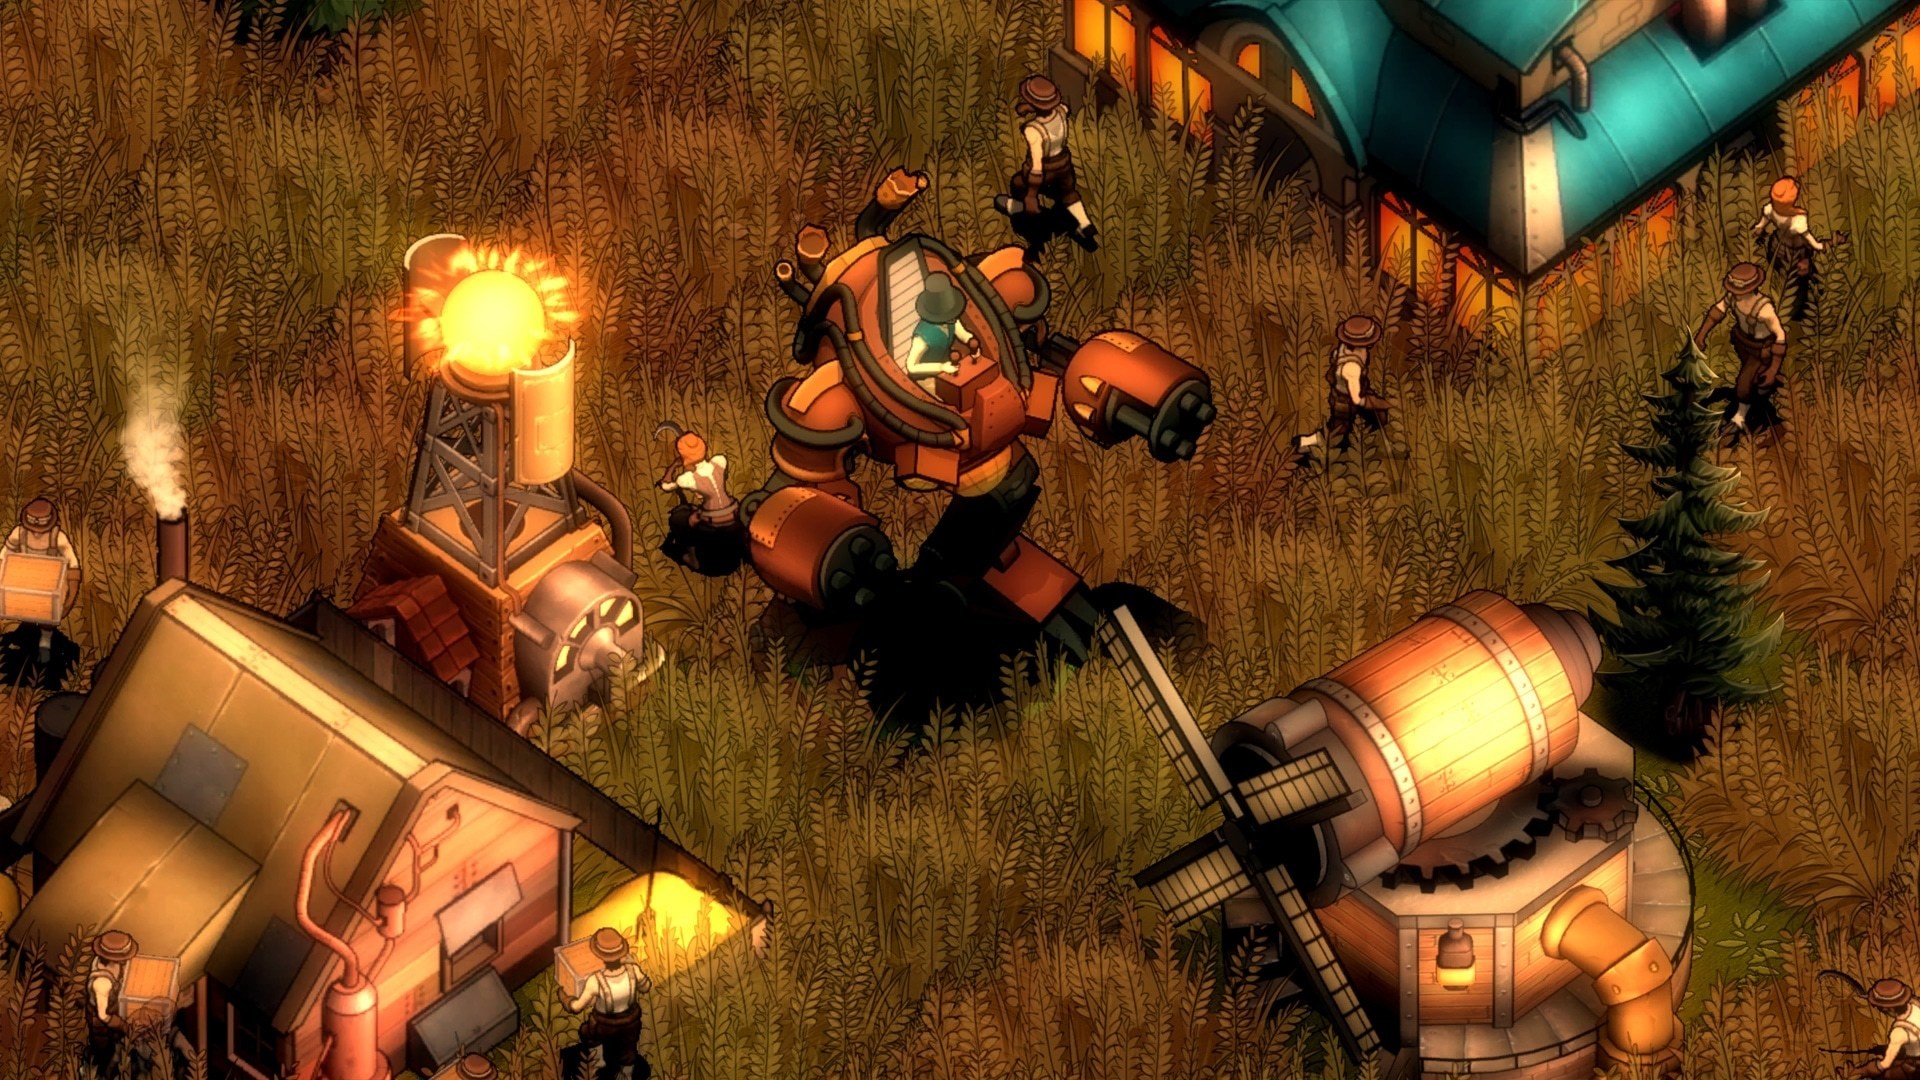 Desktop wallpaper they are billions steampunk game hd image picture background